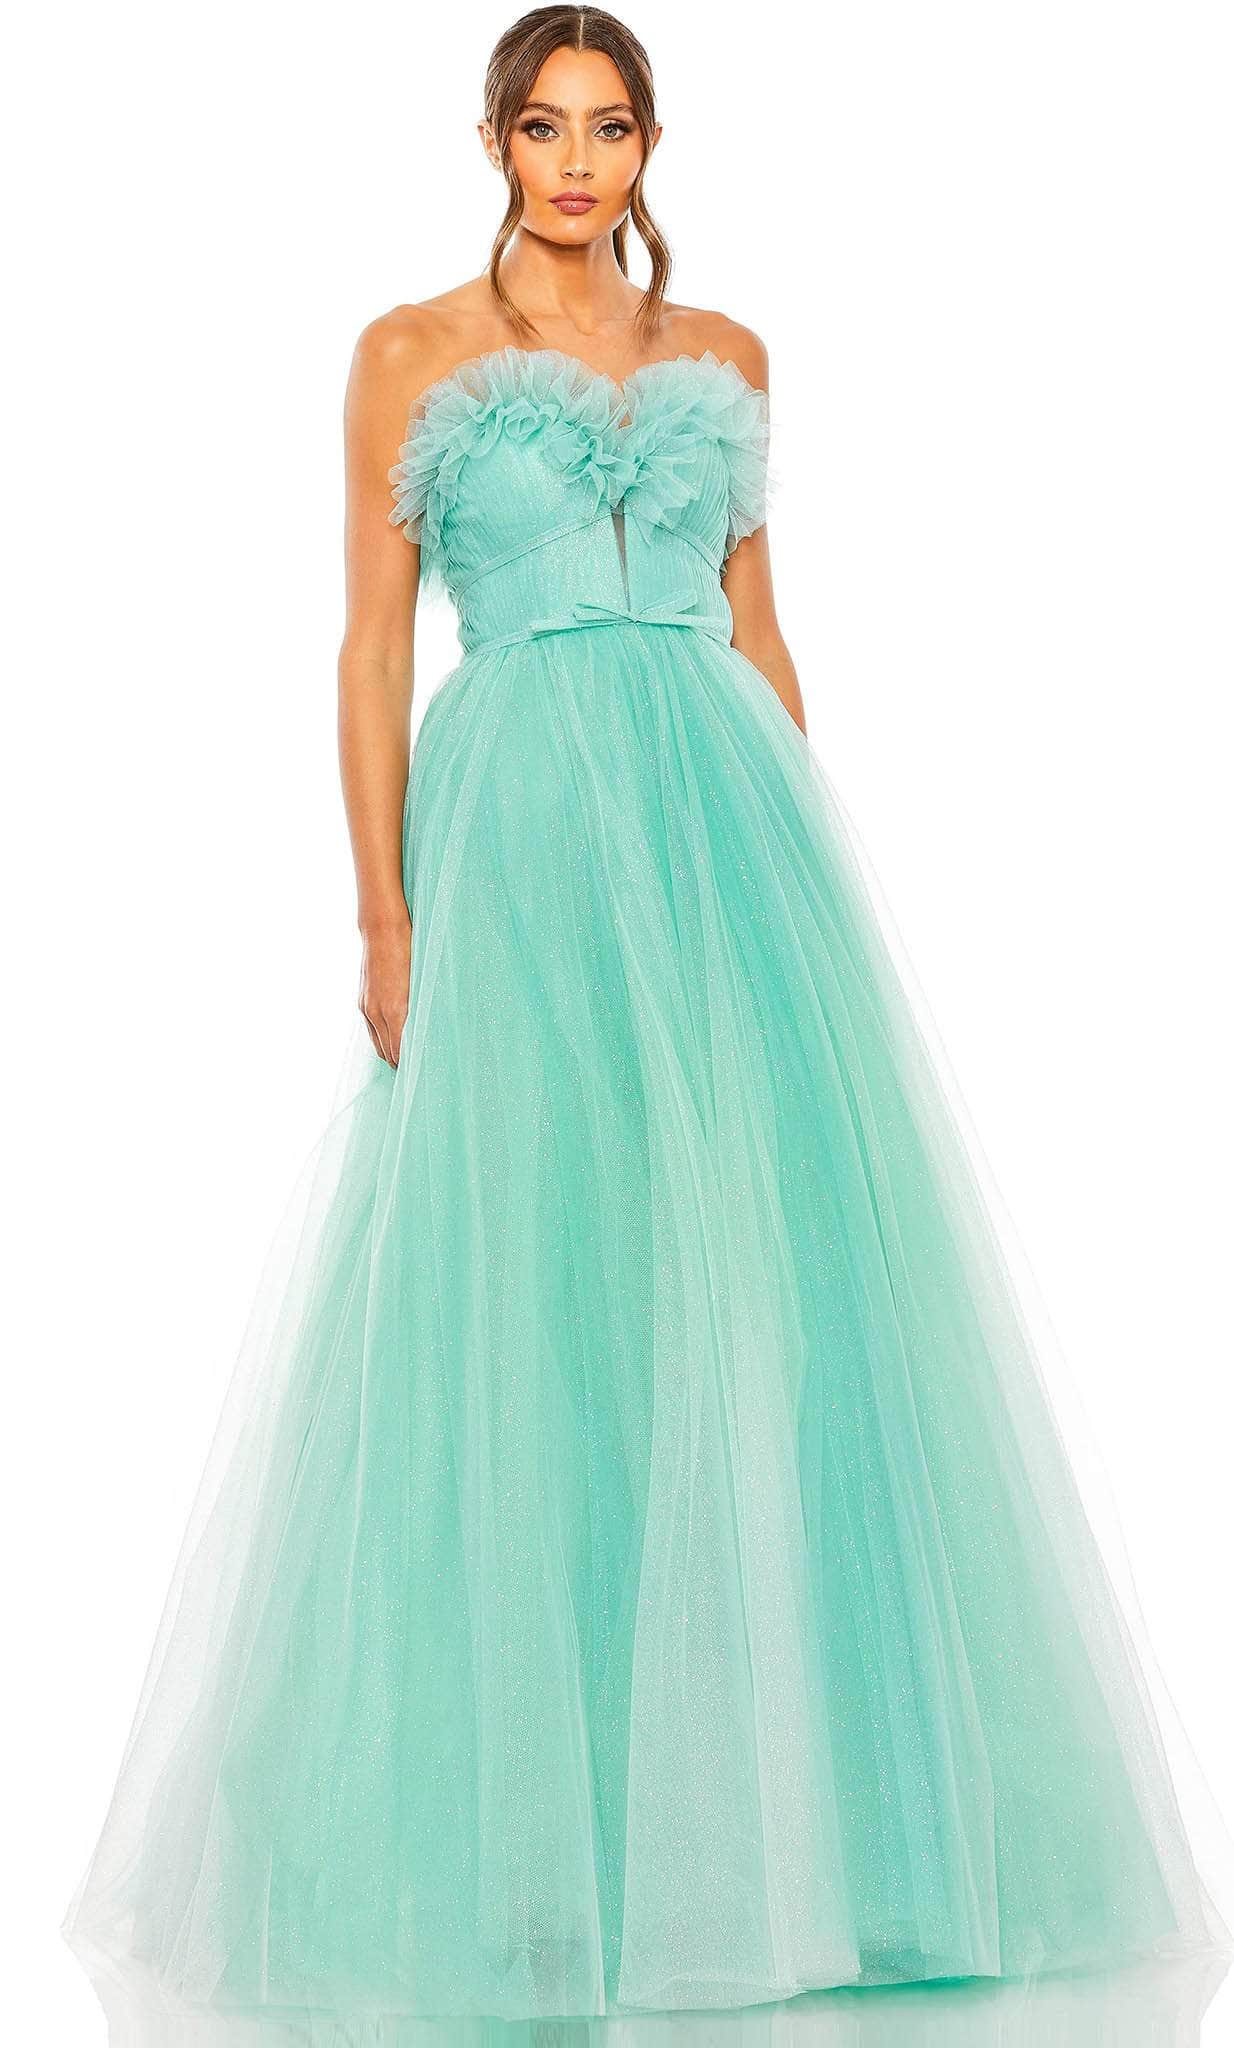 Mac Duggal 20555 - Glitter Tulle Strapless Ballgown Special Occasion Dress 0 / Aqua Ombre